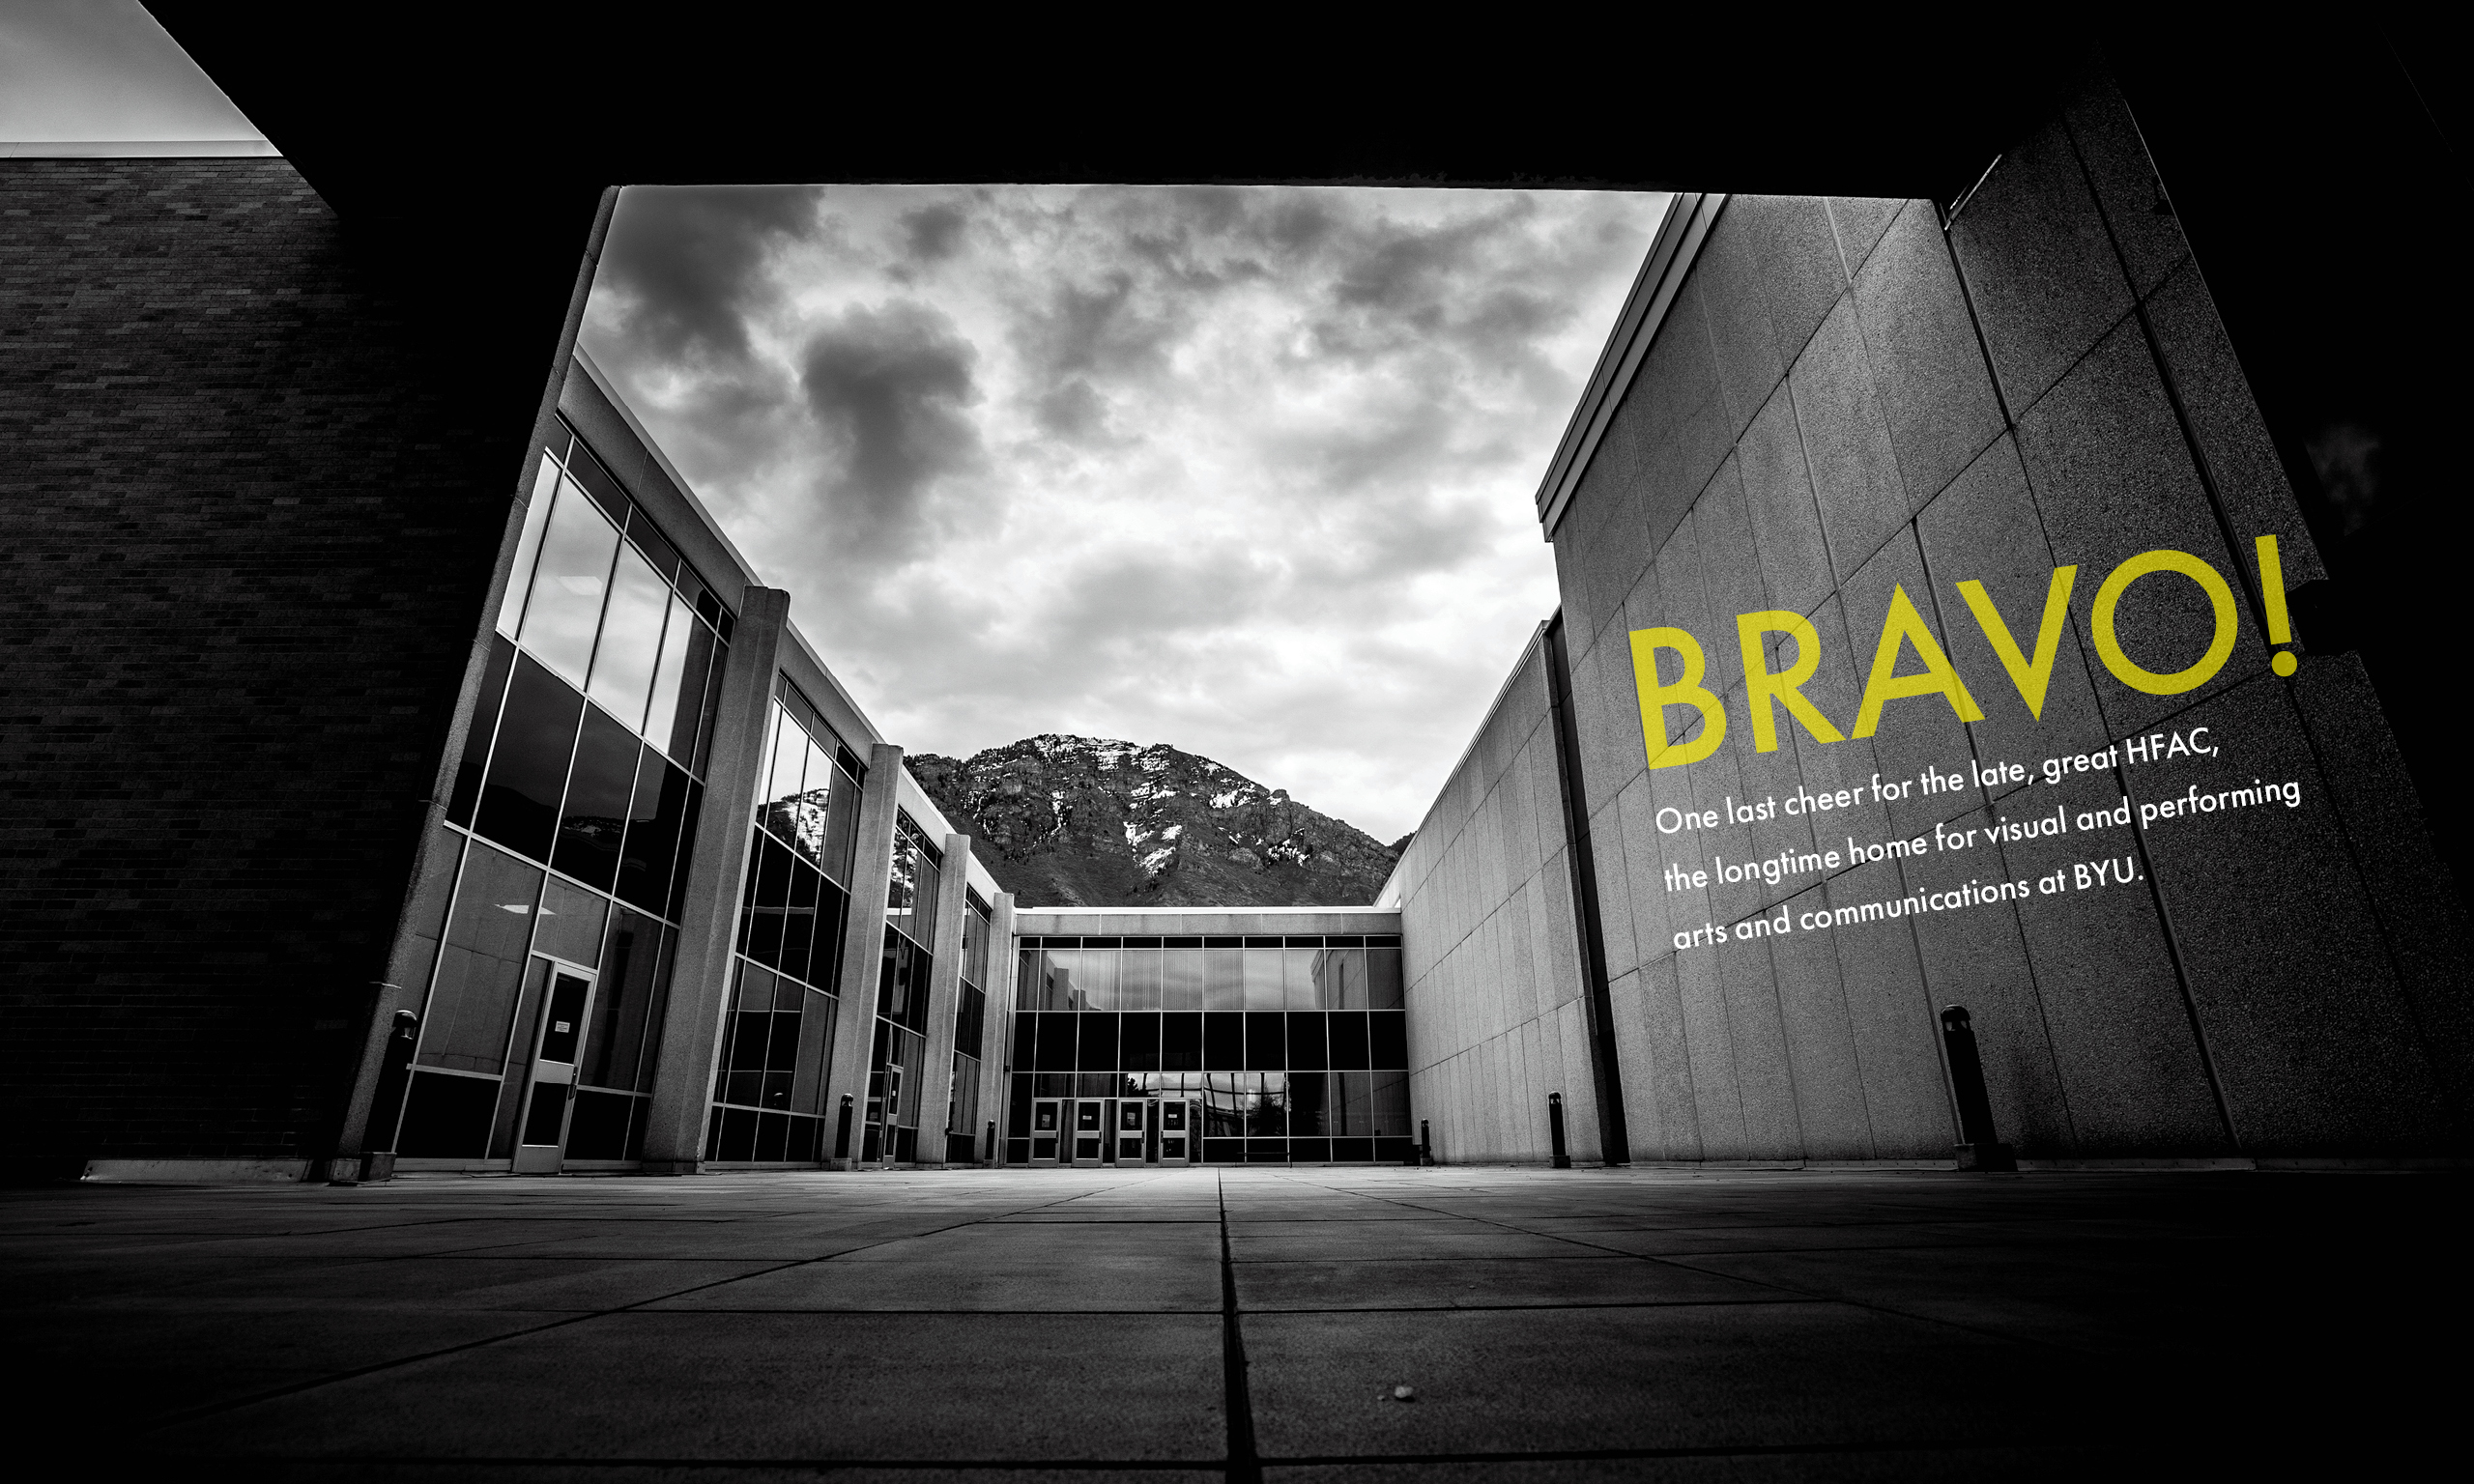 Harris Fine Arts Center courtyard with the title "Bravo!" in text.